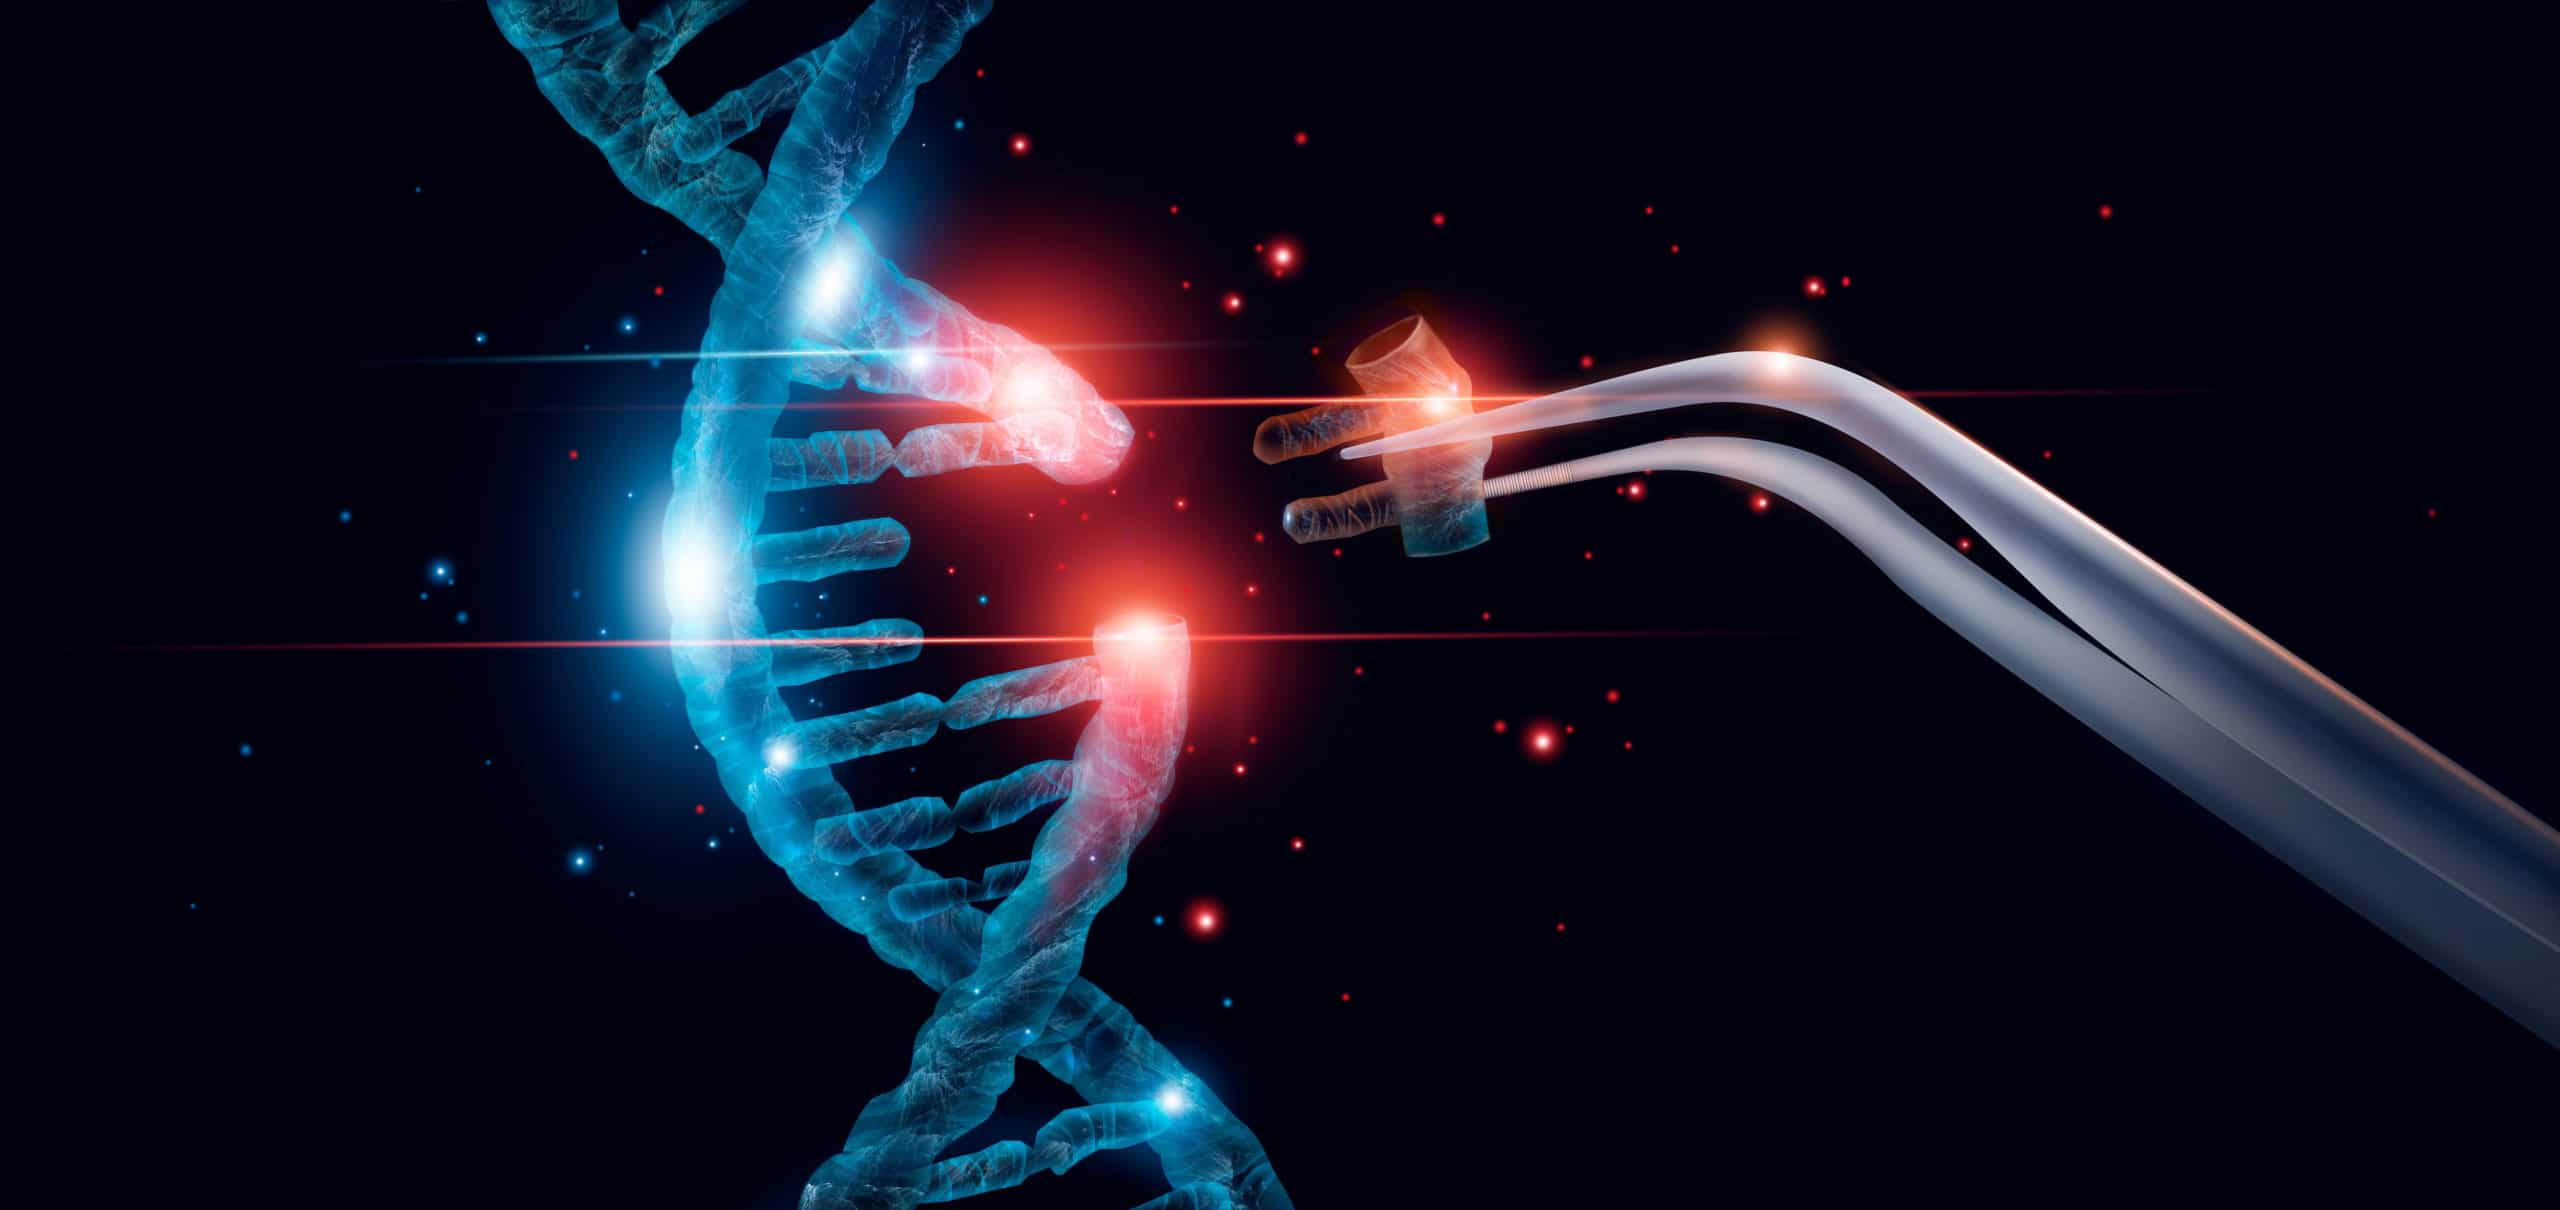 Gene editing stock image showing section of dna strand cut